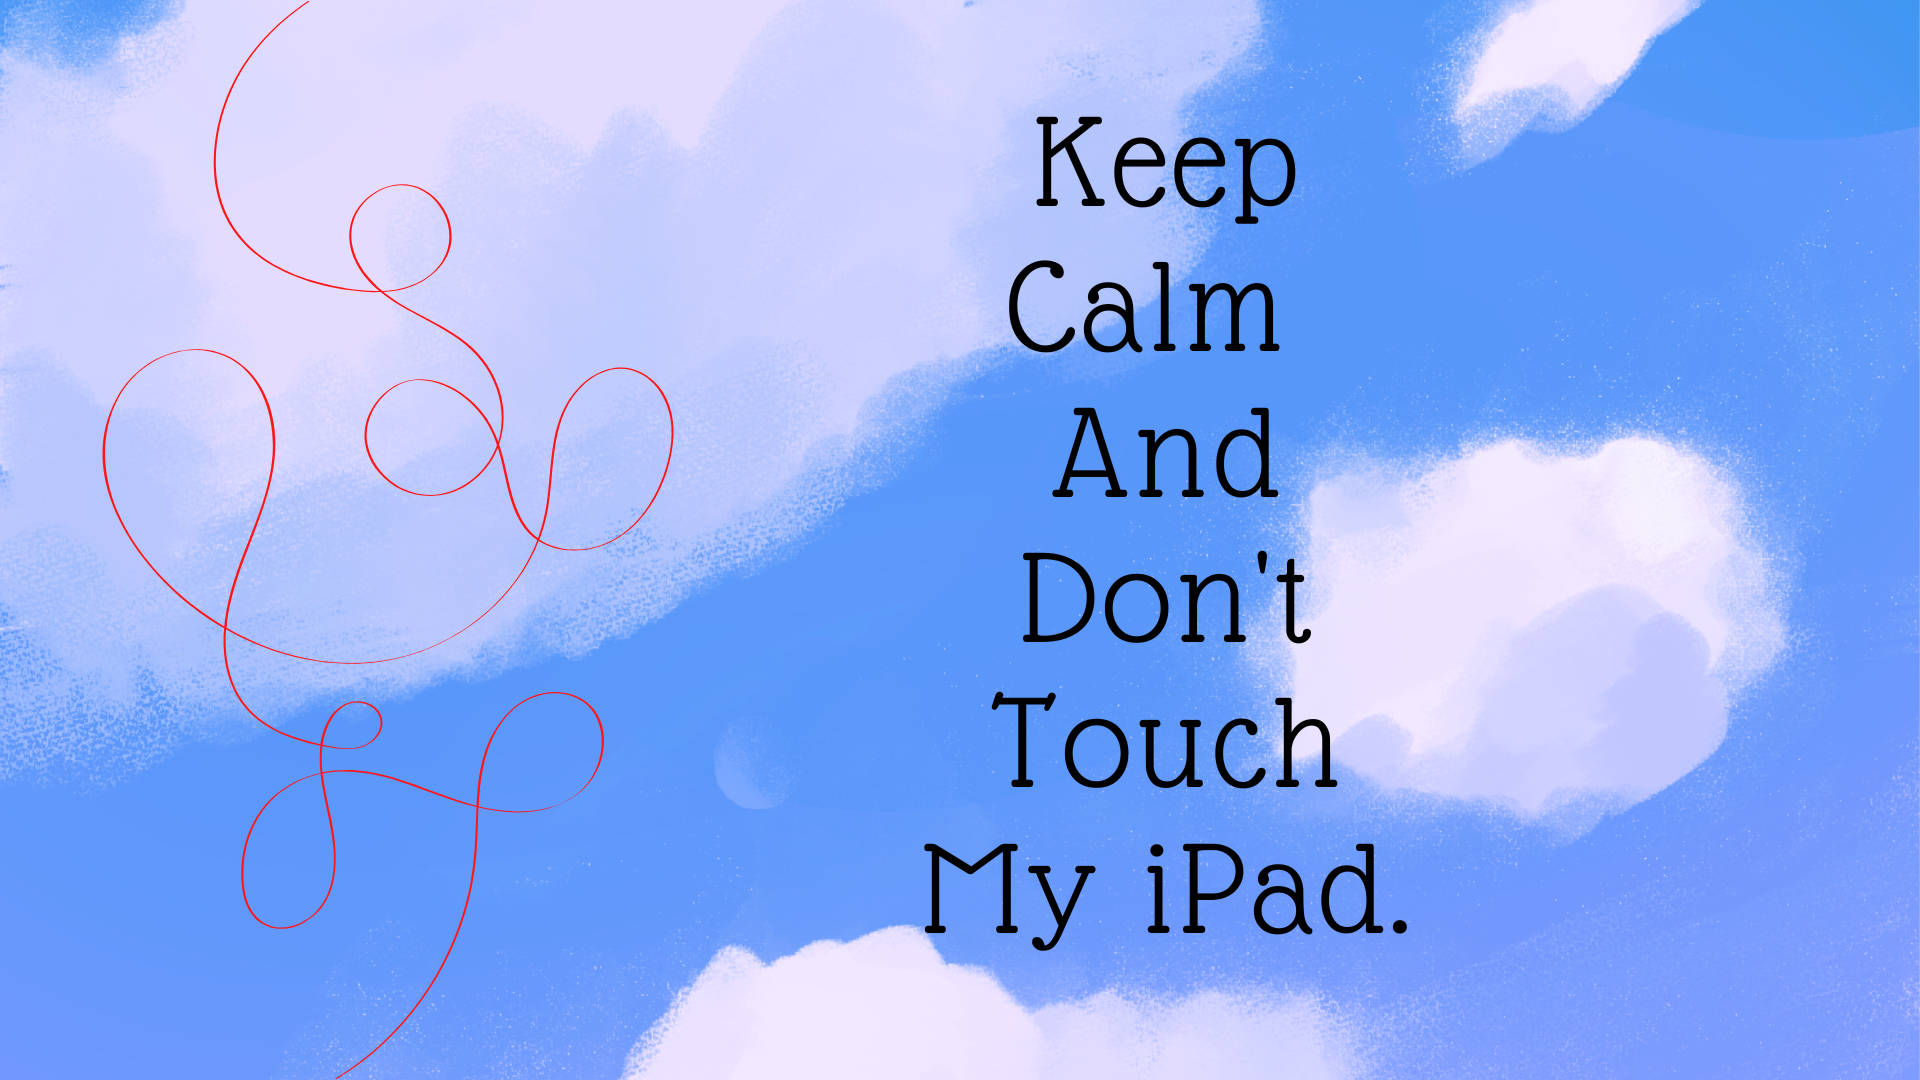 Keep Calm And Don’t Touch My Ipad Background